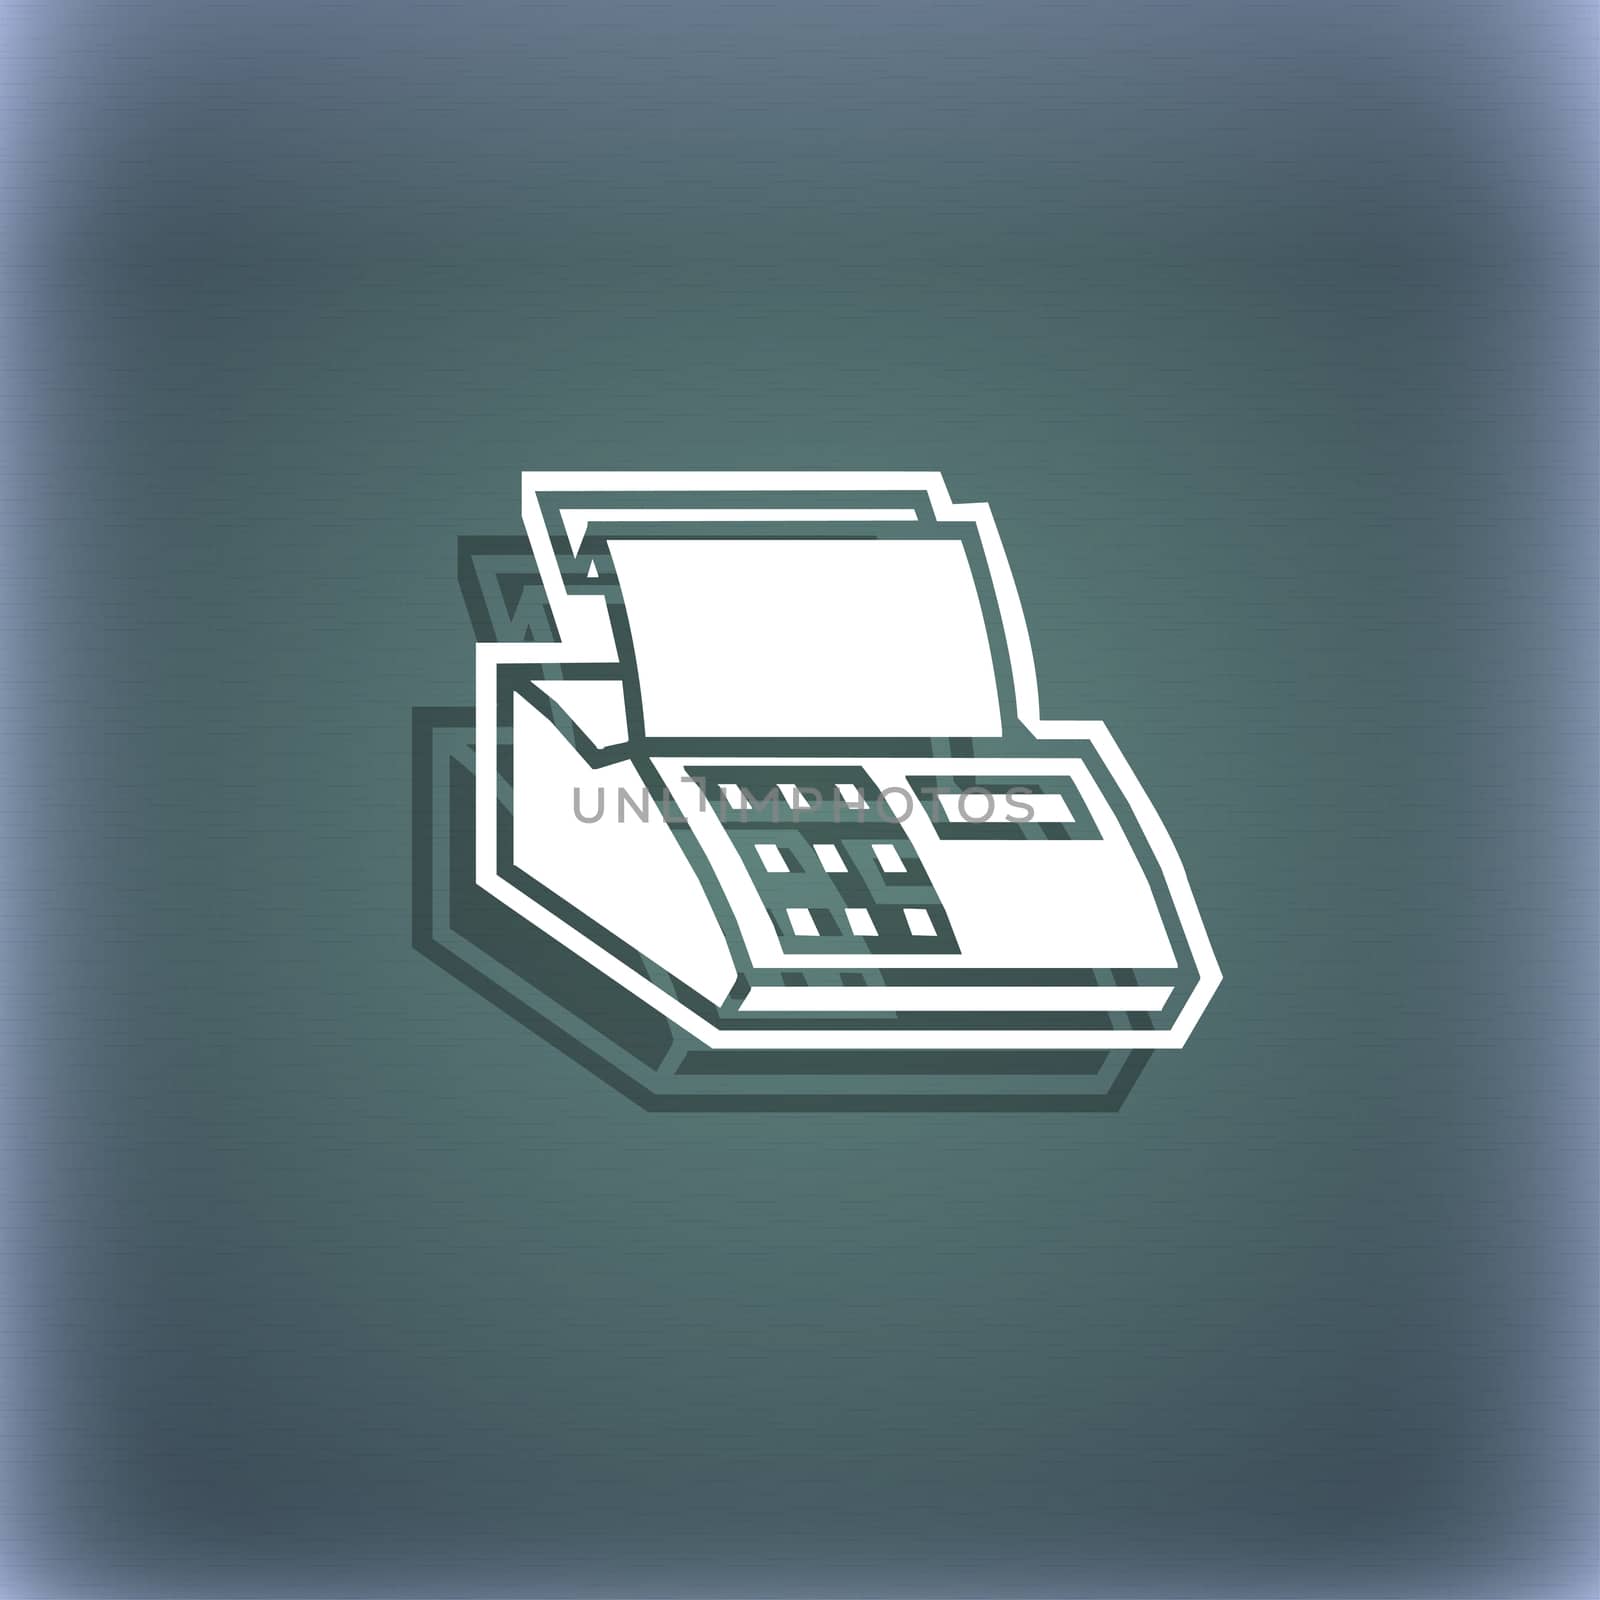 Cash register machine icon symbol on the blue-green abstract background with shadow and space for your text. illustration